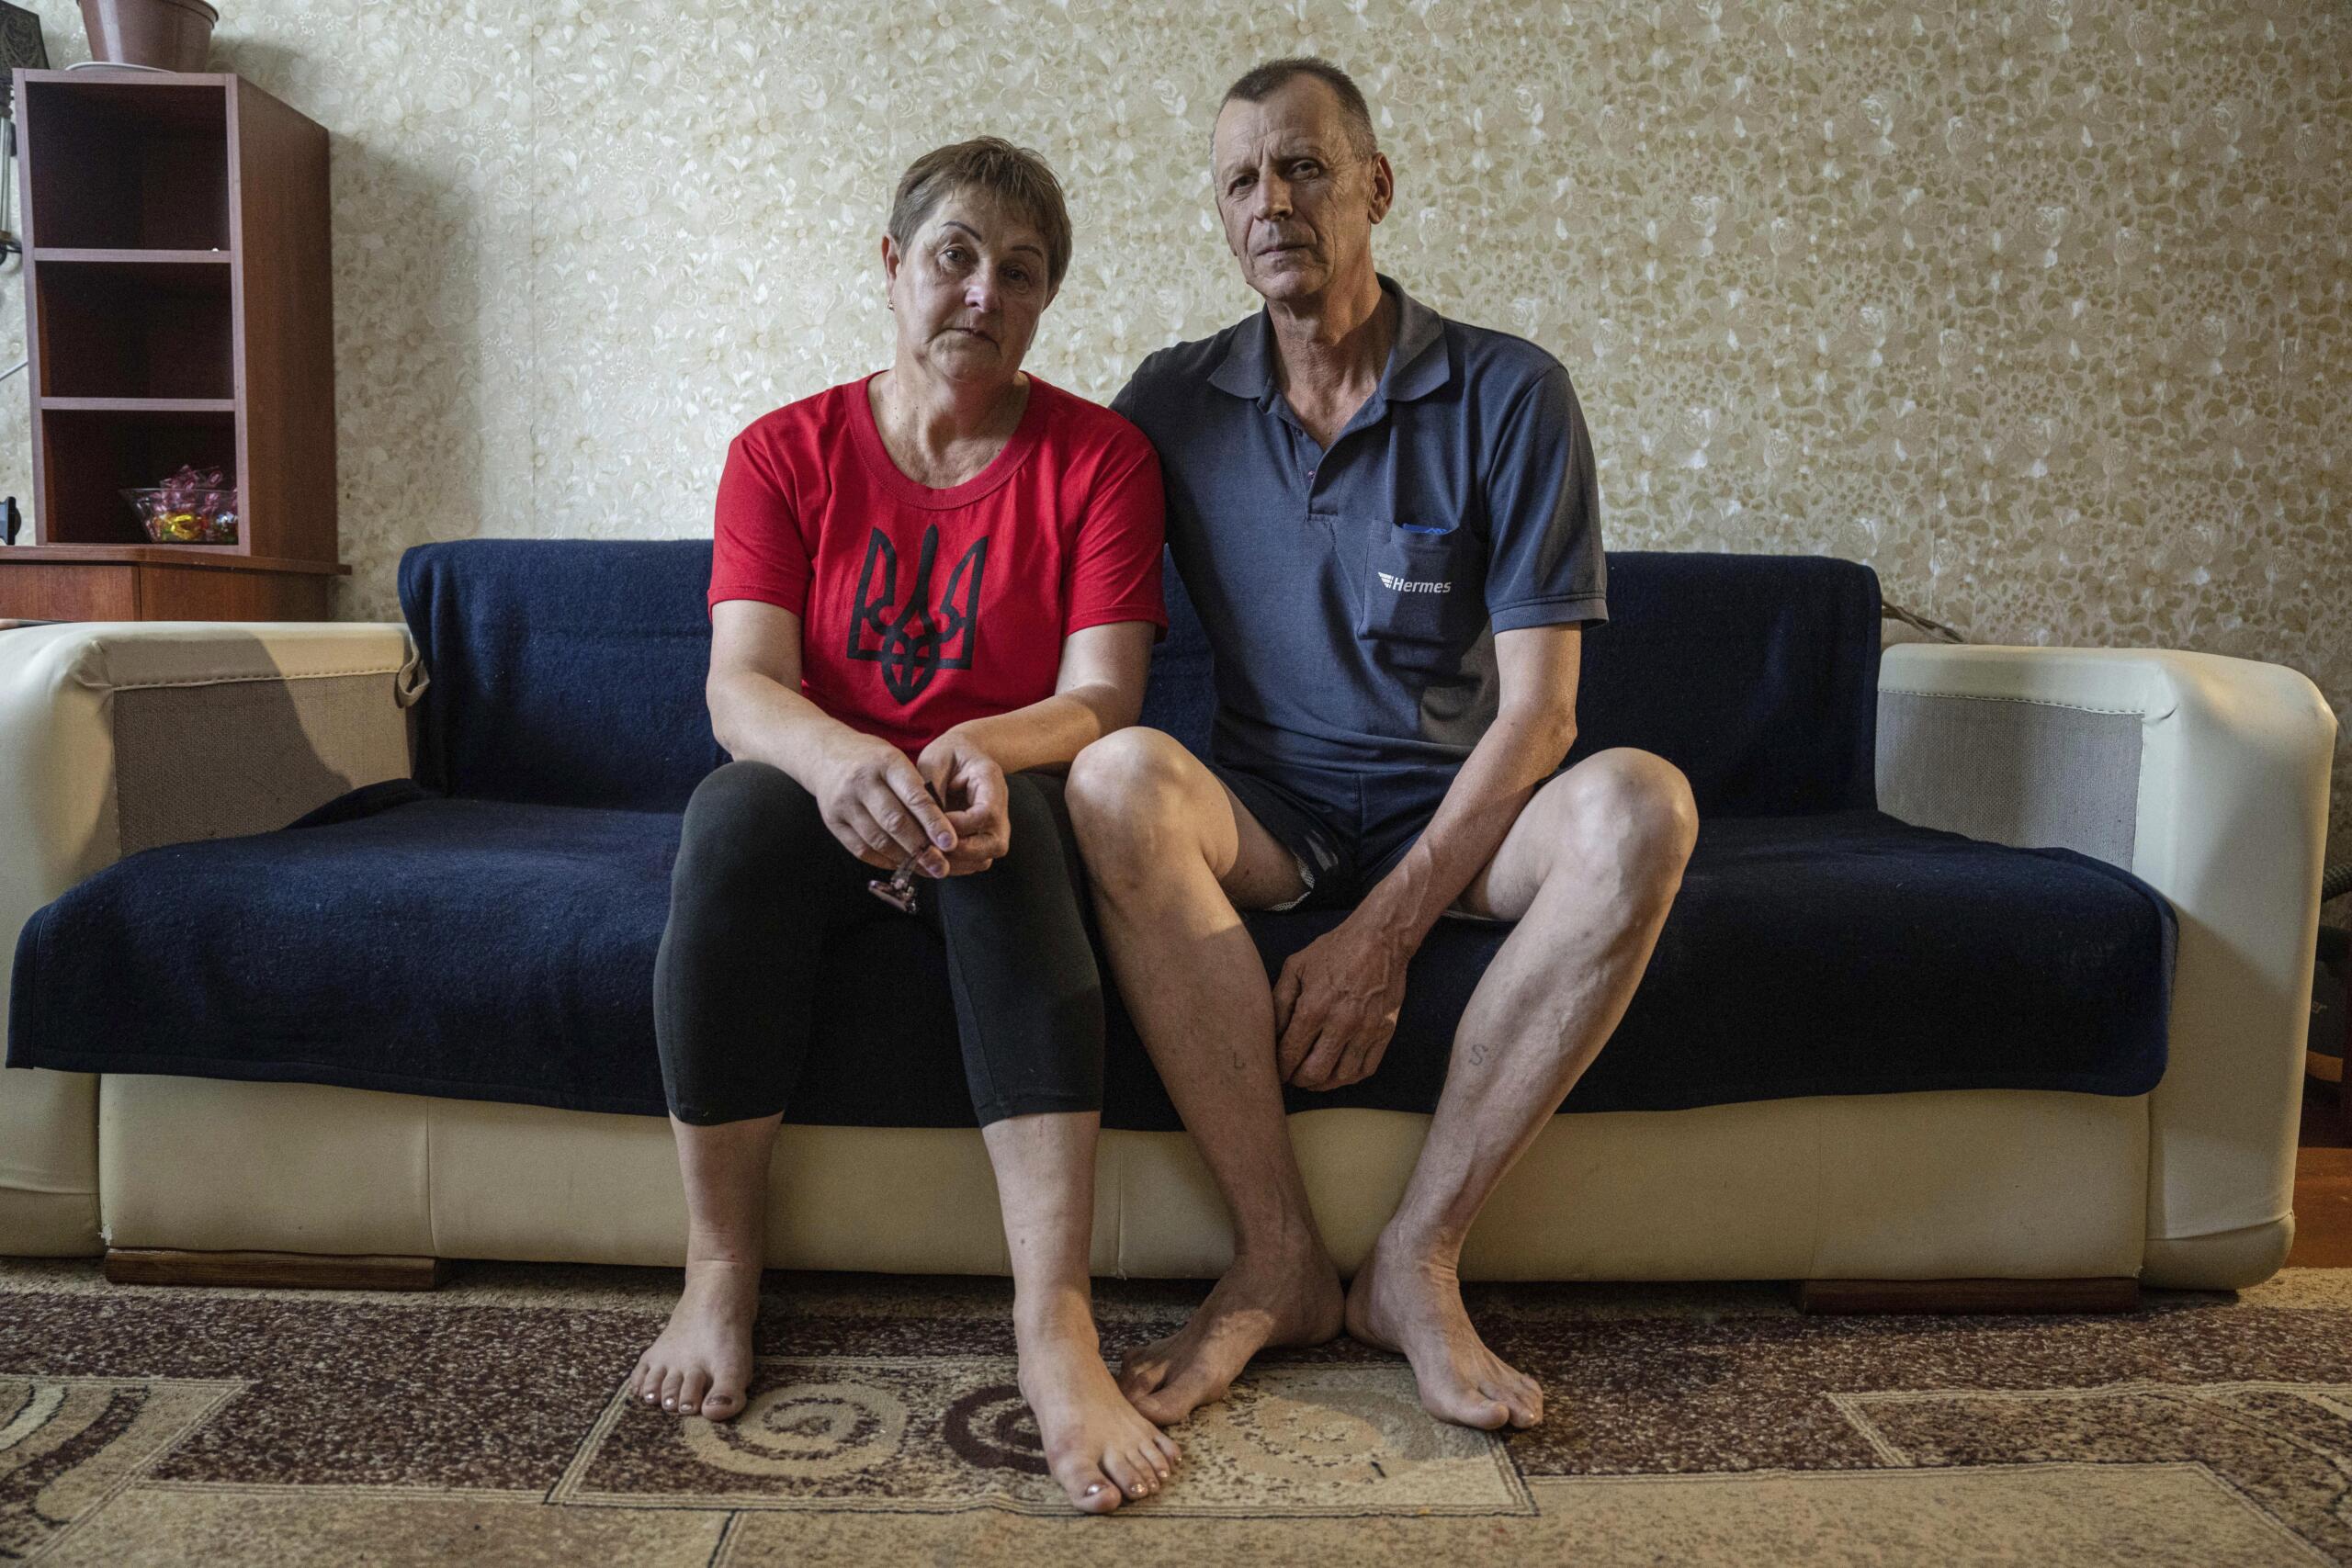 Nataliia Skakun and her husband Serhii, former residents of Oleshky, Ukraine, sit on a sofa at their apartments in Mykolaiv, Ukraine, Tuesday, July 4, 2023. "Young people left, and pensioners stayed," said Skakun, 54, who recently left Oleshky with her husband and resettled in Mykolaiv in the Kherson region.